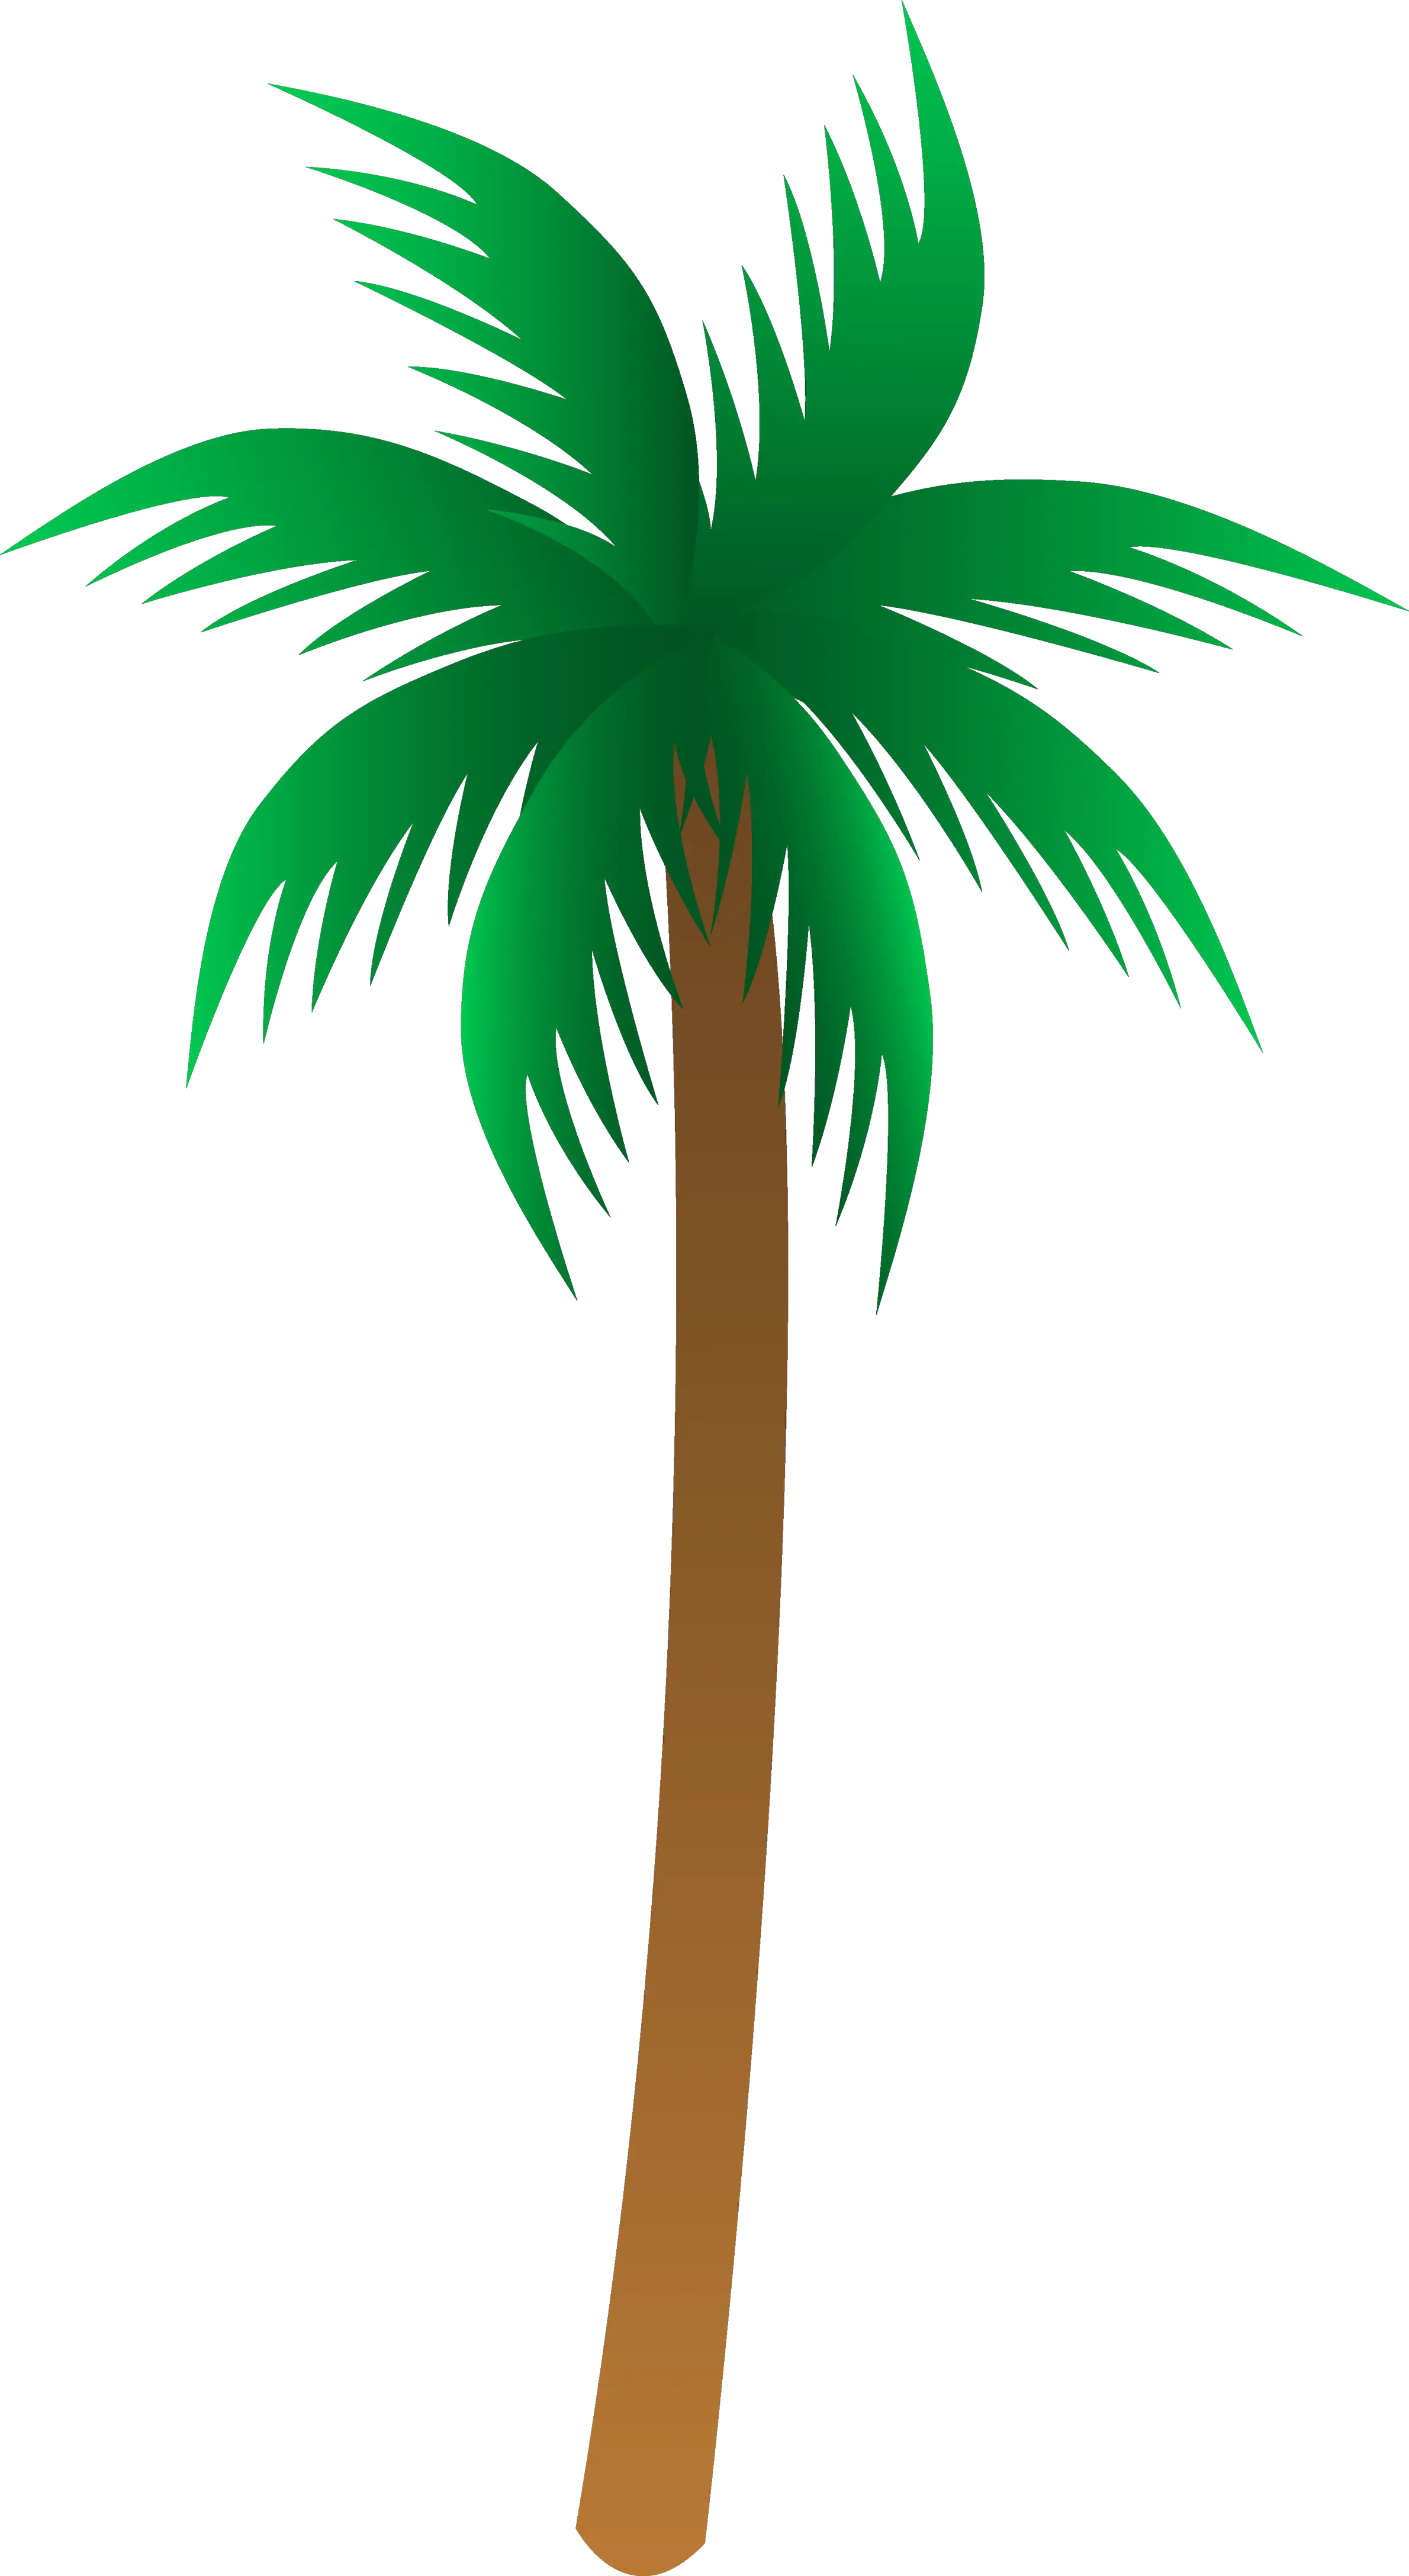 Christmas Lights Wrapped Around Palm Tree Trunk Lights Only Png